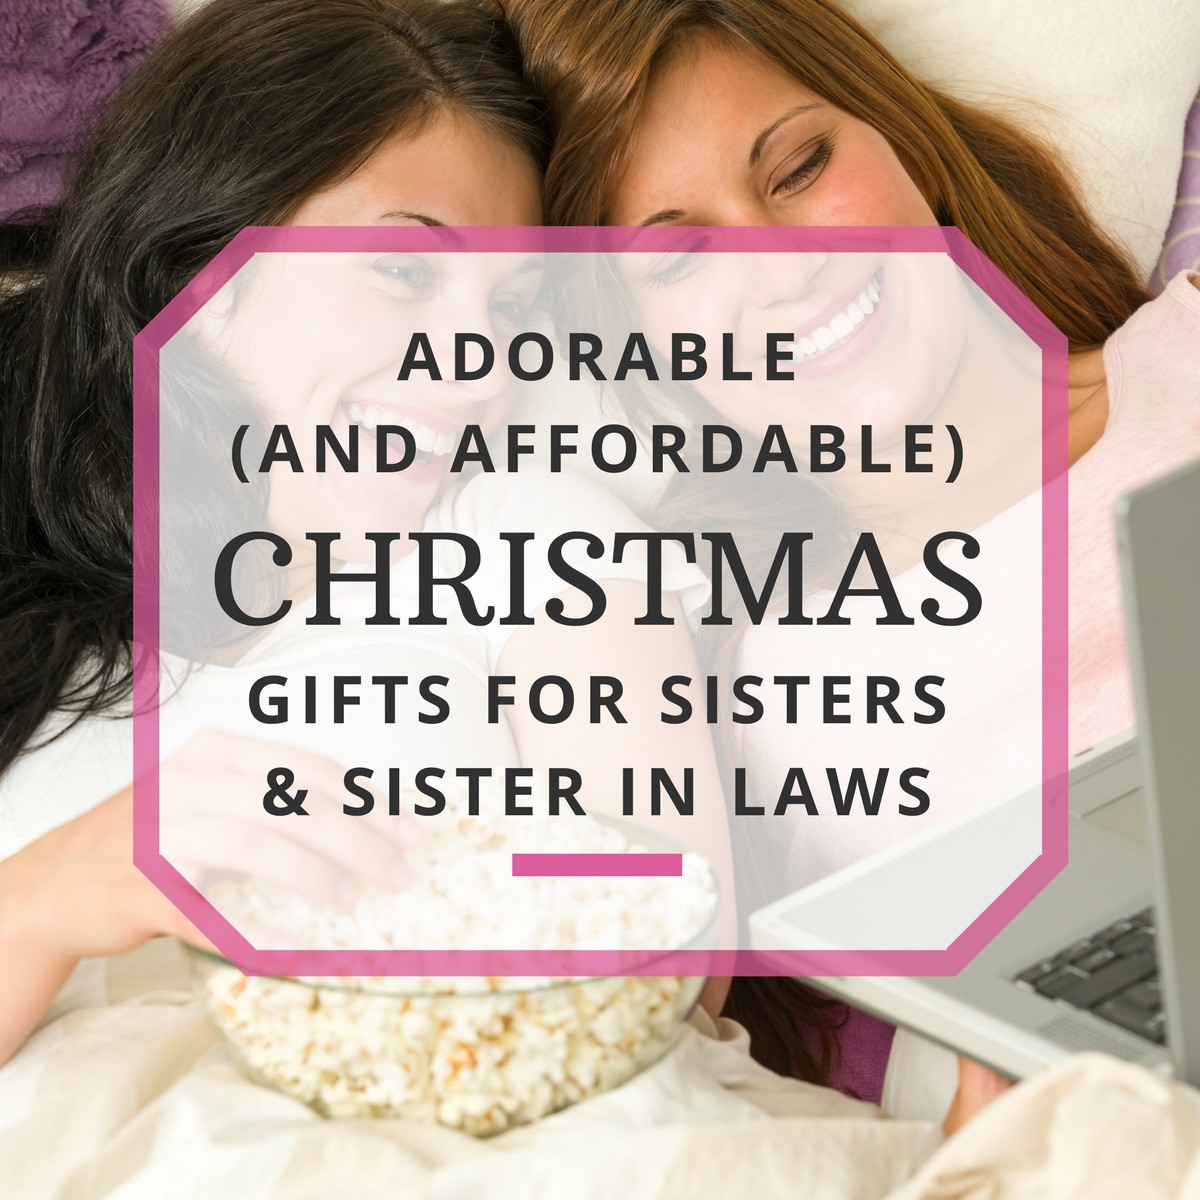 Gift Ideas For Sister Christmas
 Adorable and Affordable Christmas Gifts for Sisters